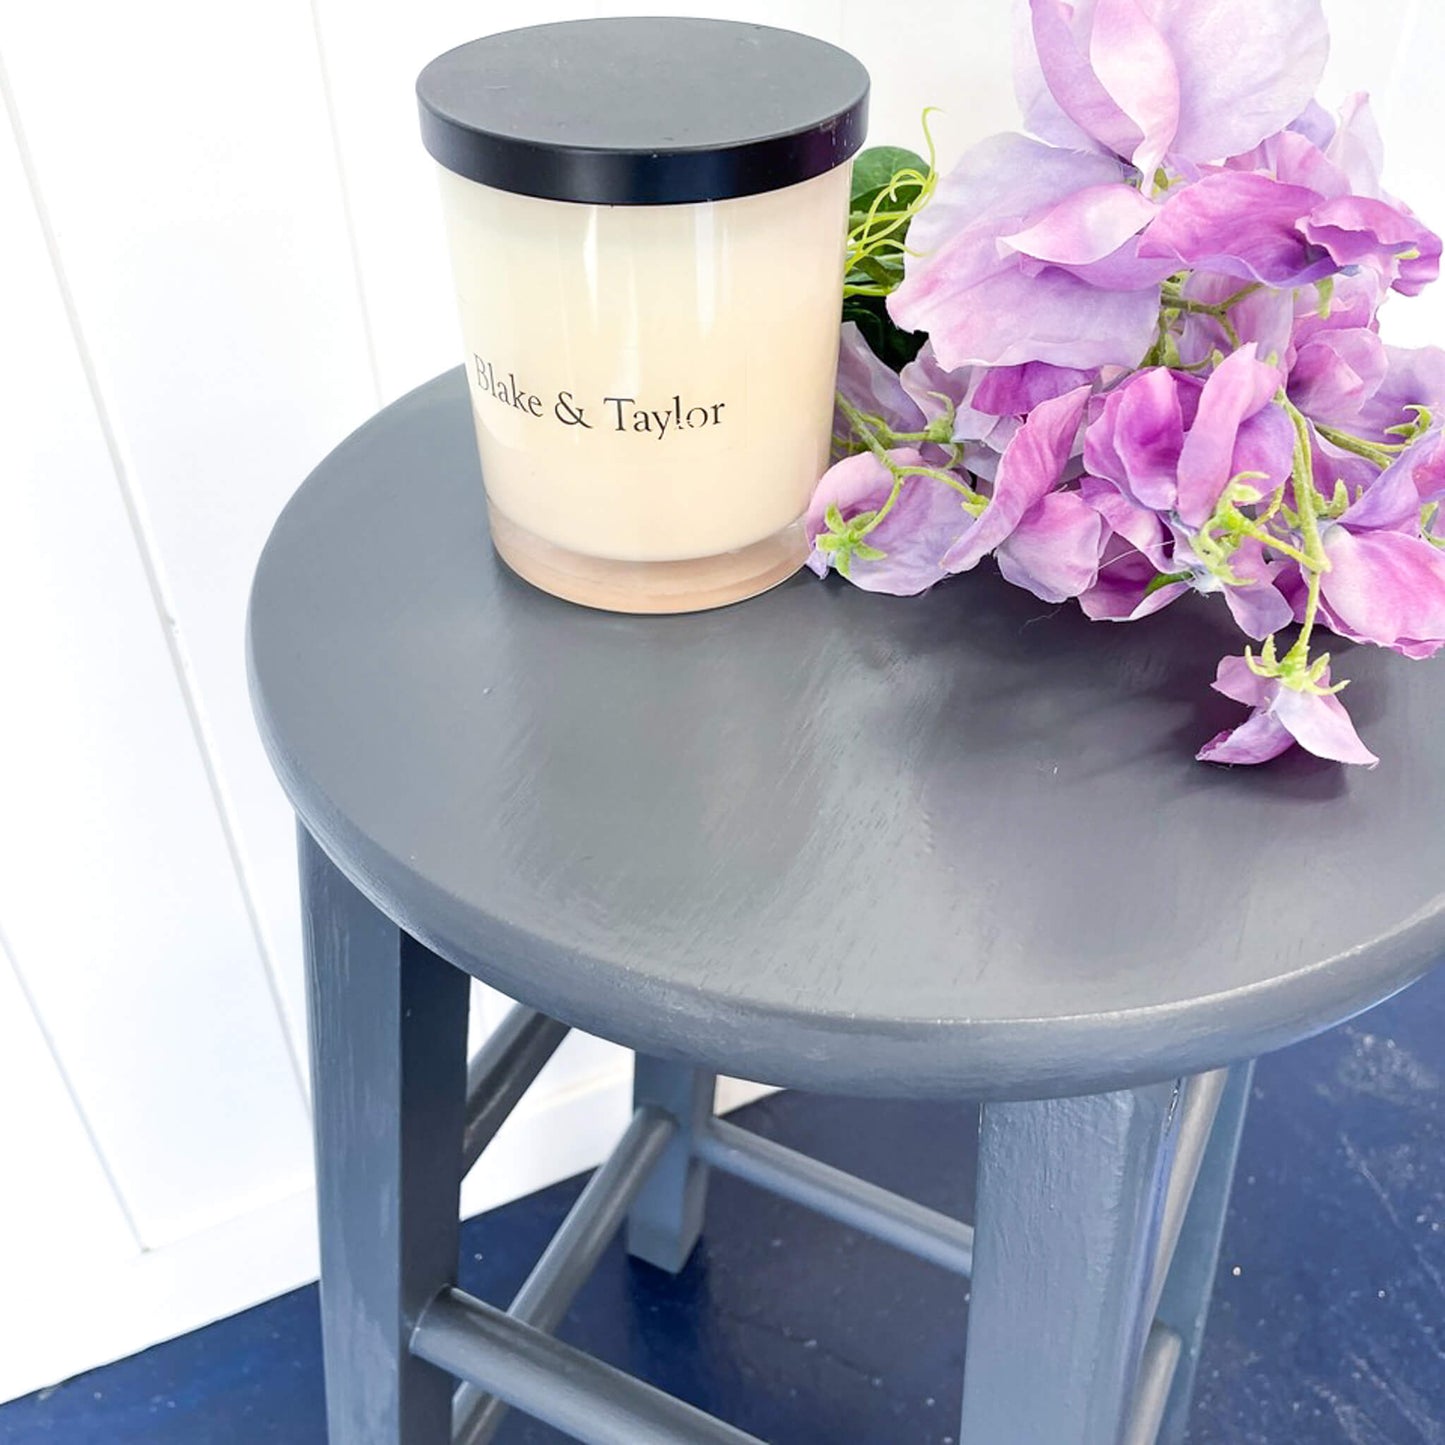 Round timber stool painted with Blake & Taylor Steel Grey Chalk Furniture Paint